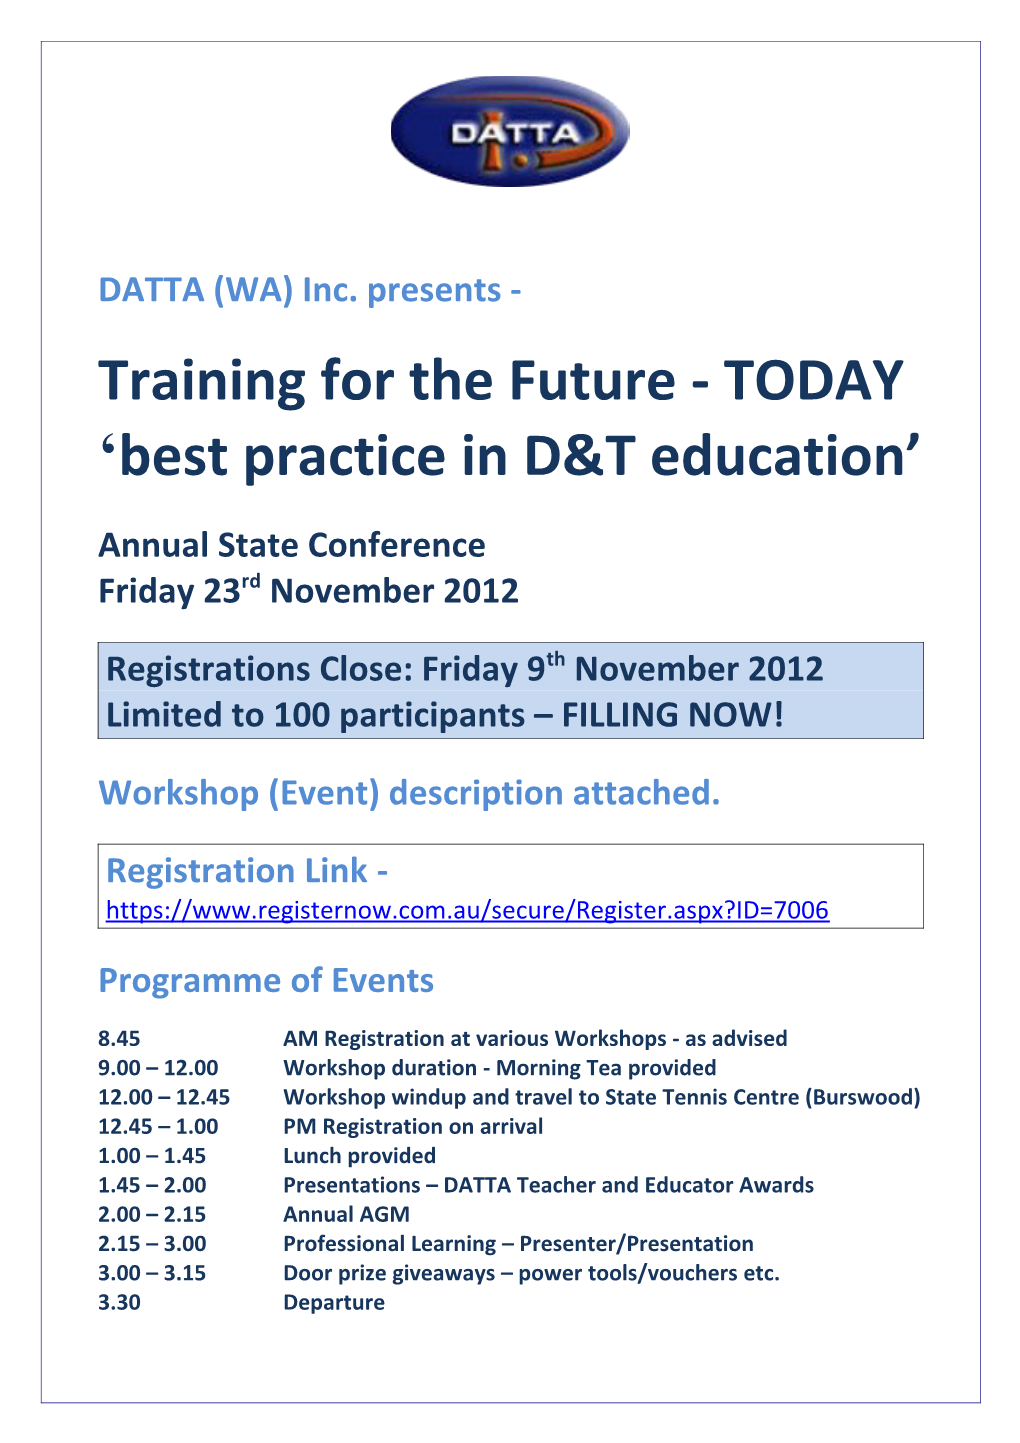 Training for the Future - TODAY